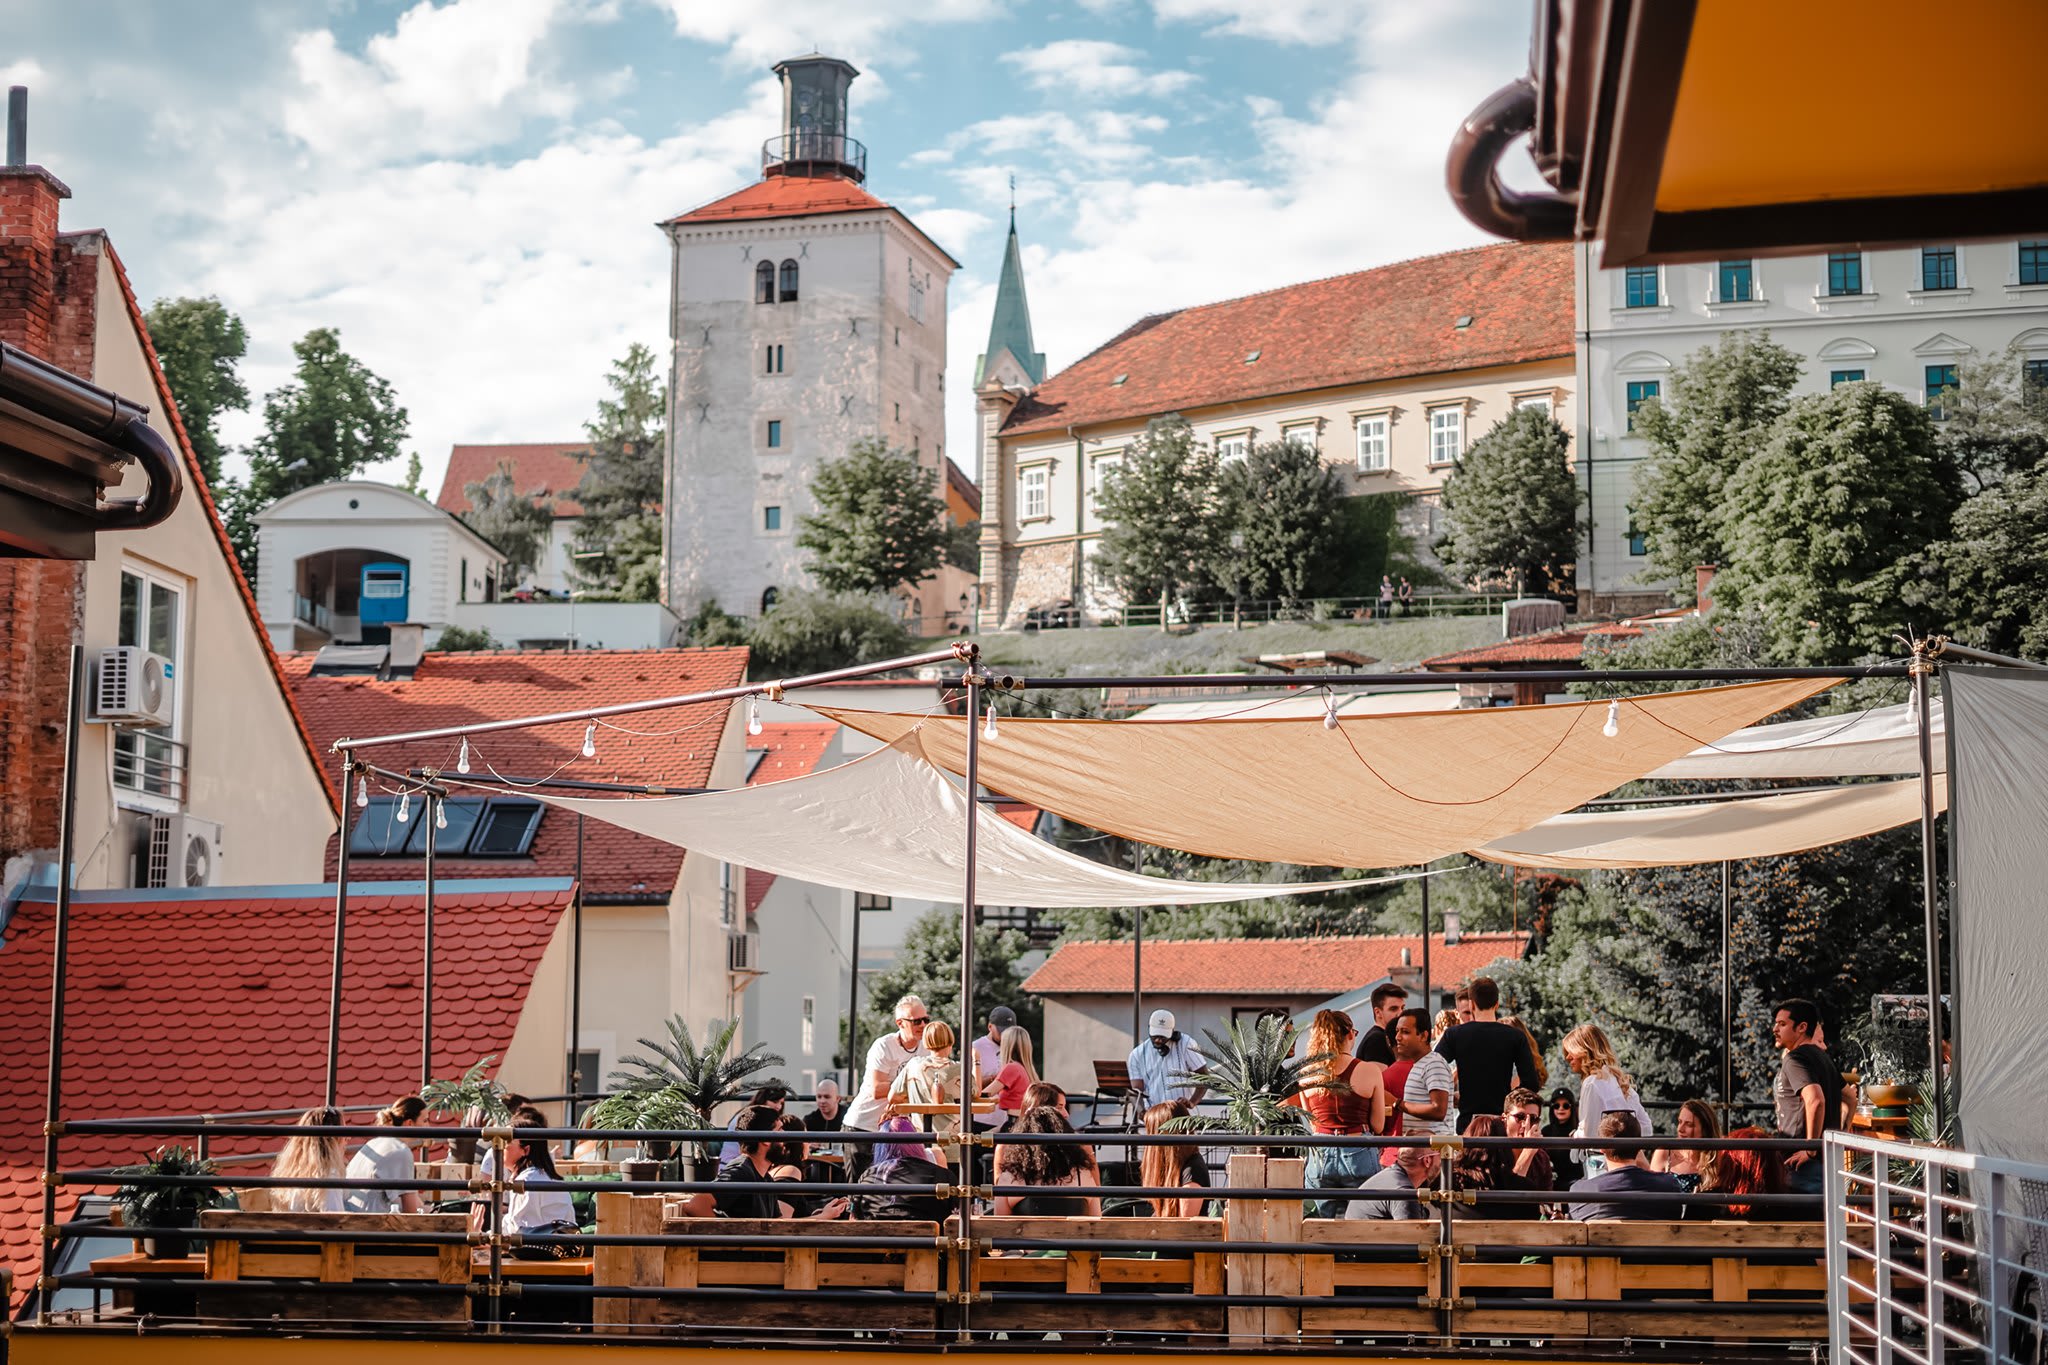 Chillout Hostel Zagreb, Zagreb - 2021 Prices & Reviews - Hostelworld